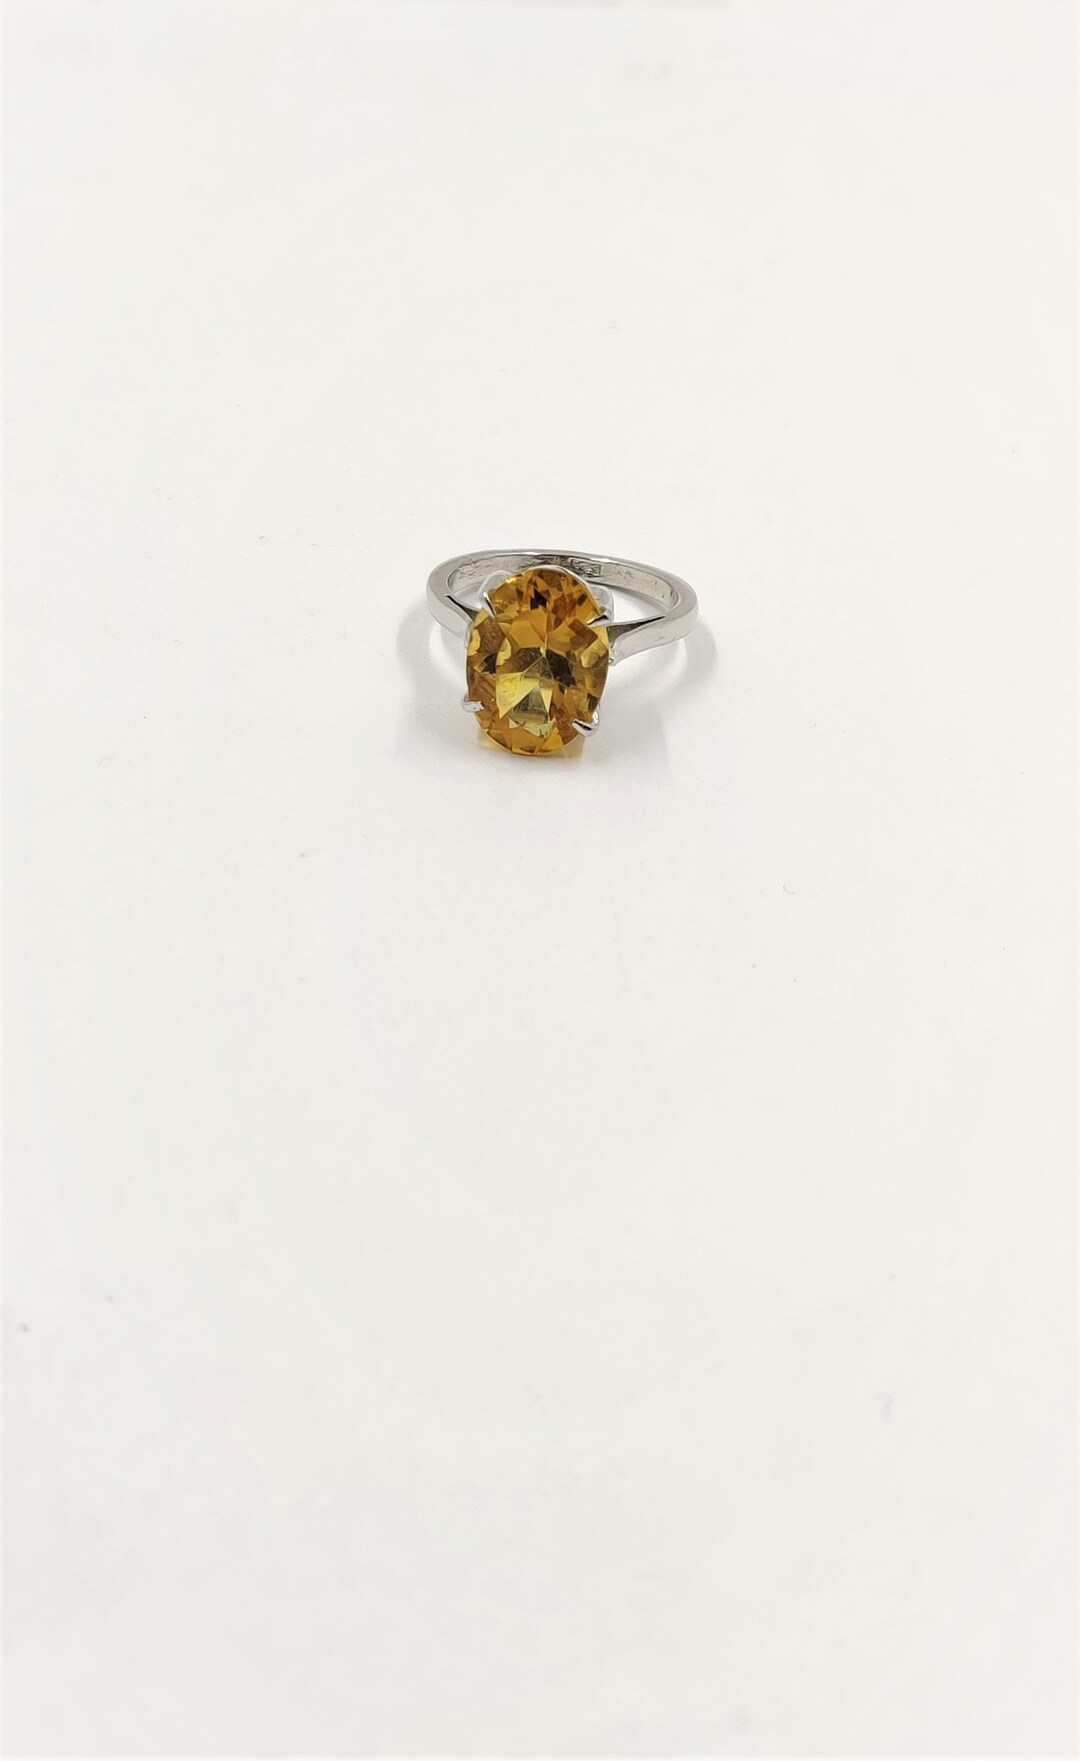 Buy AAA Quality Beautiful Citrine Gemstone Ring in Oval Shape Made ...